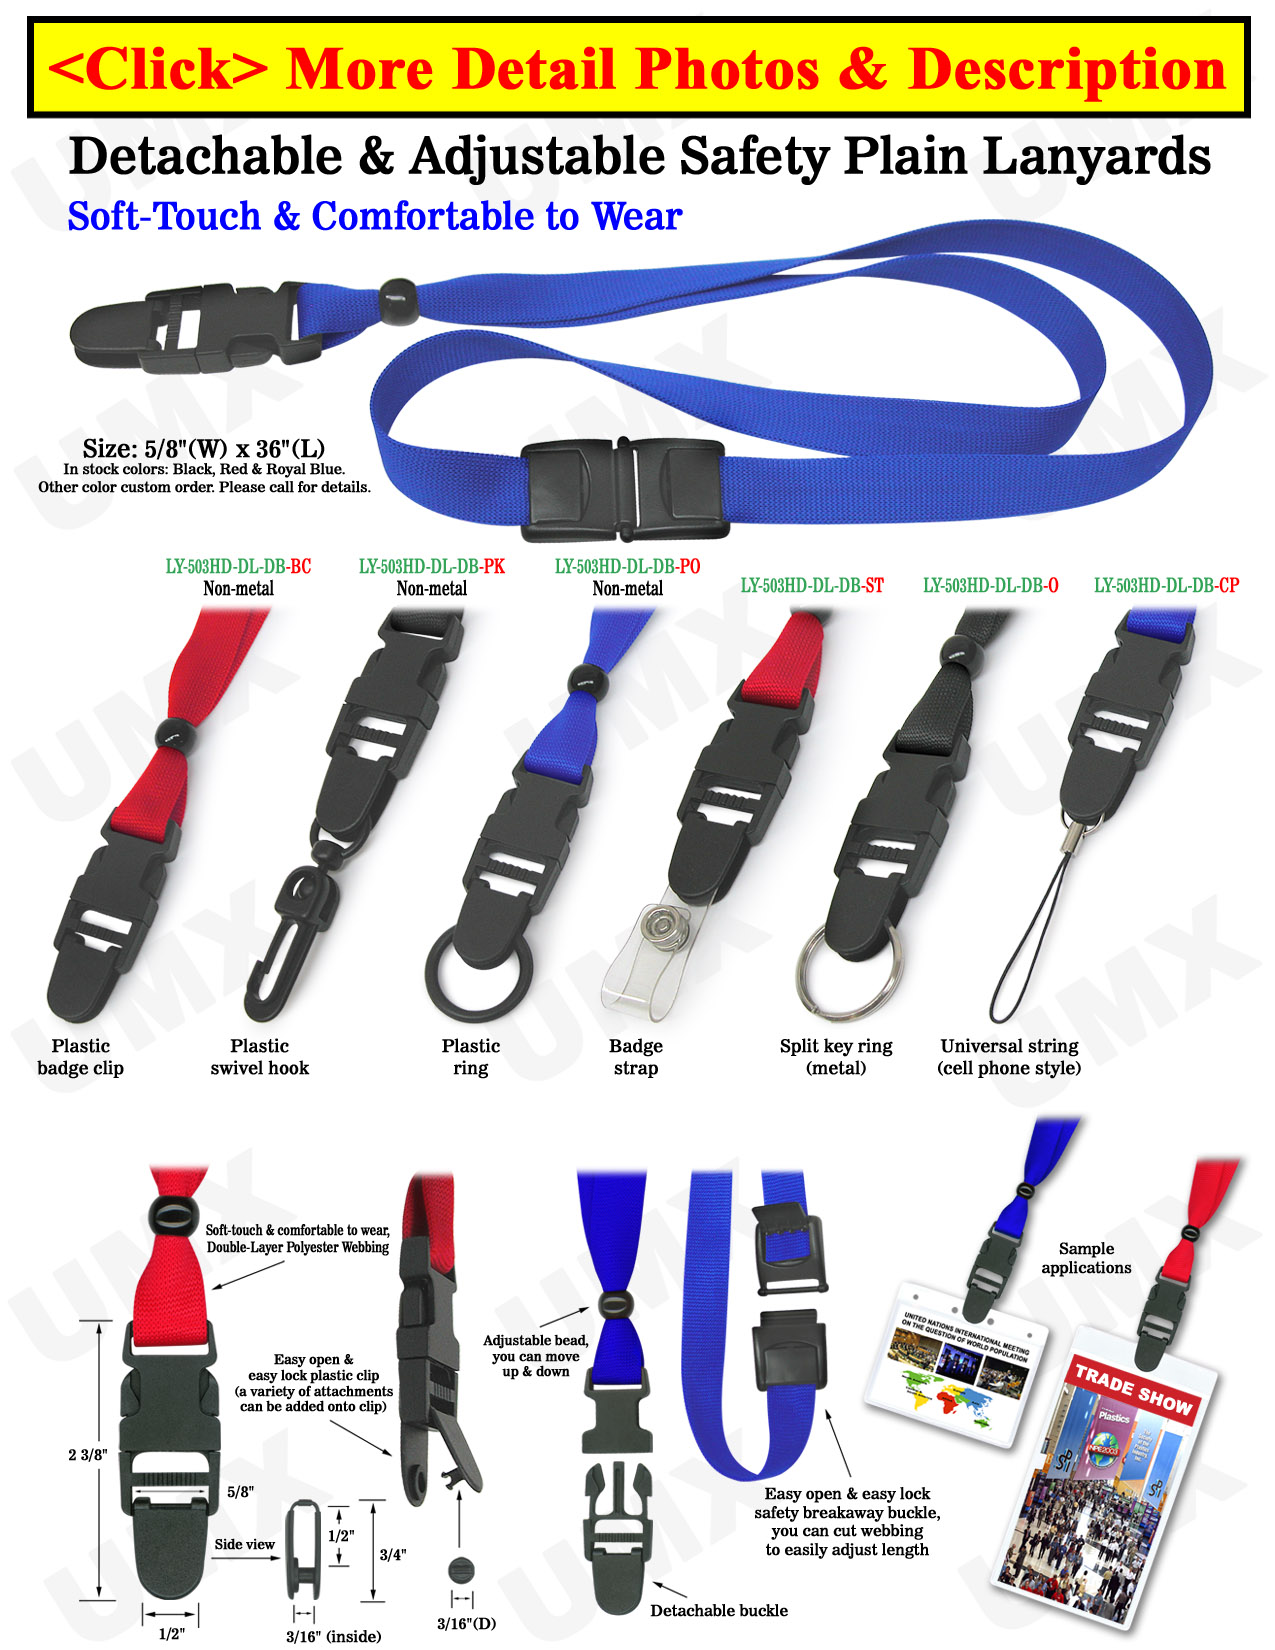 5/8" Adjustable & Detachable Safety Plain Lanyards With Detachable Side Release Buckles LY-503HD-DL-DB/Per-Piece